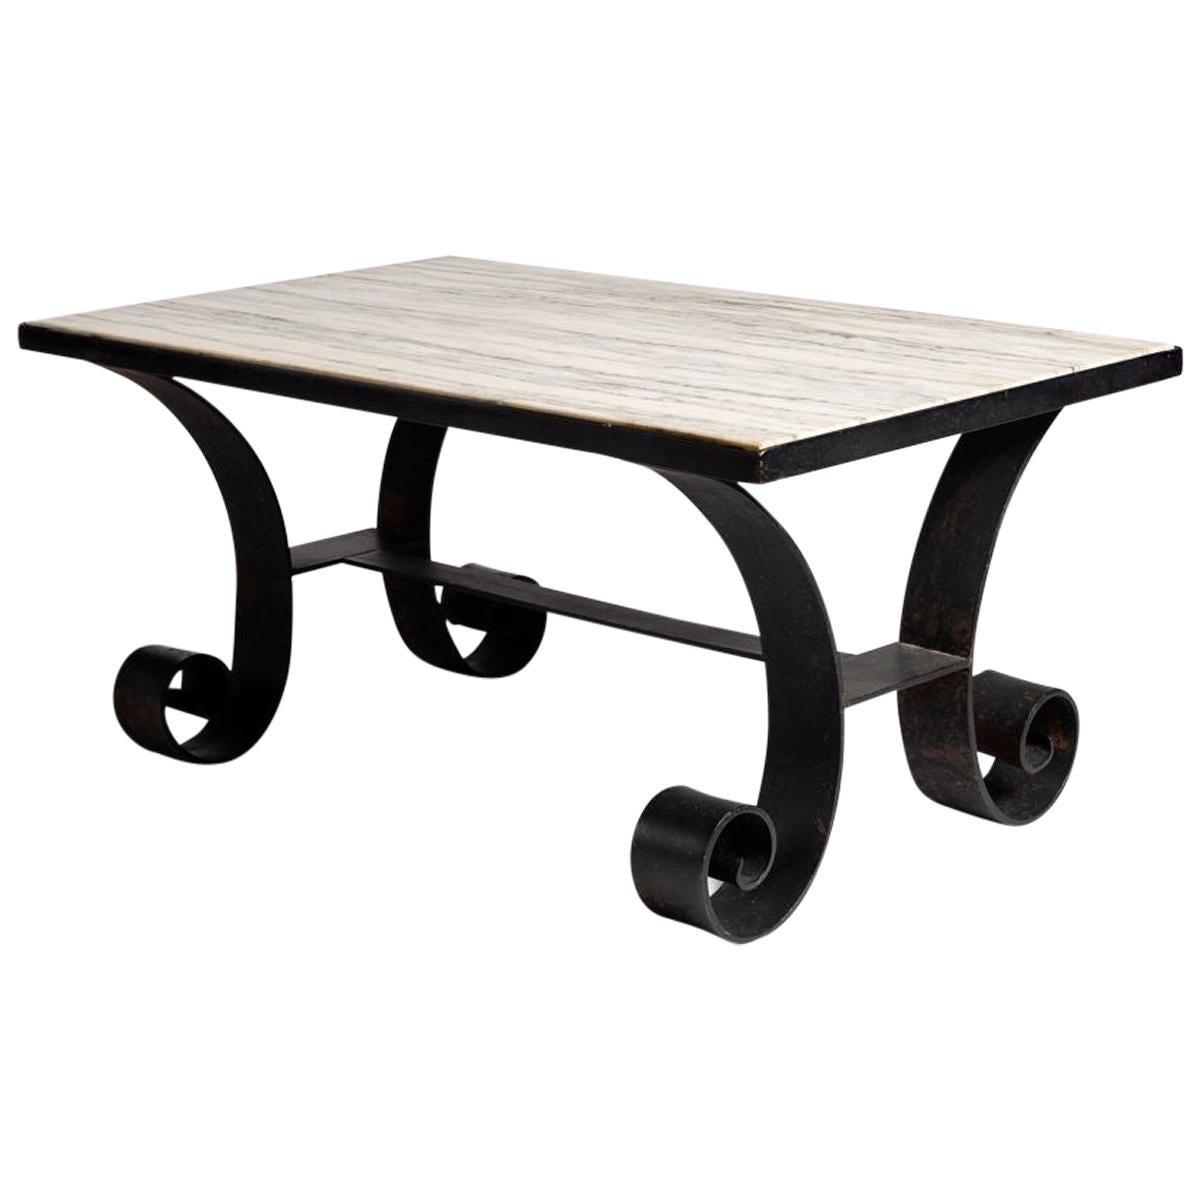 Rectangular Stone Topped Wrought-Iron Coffee Table, French, circa 1920s For Sale